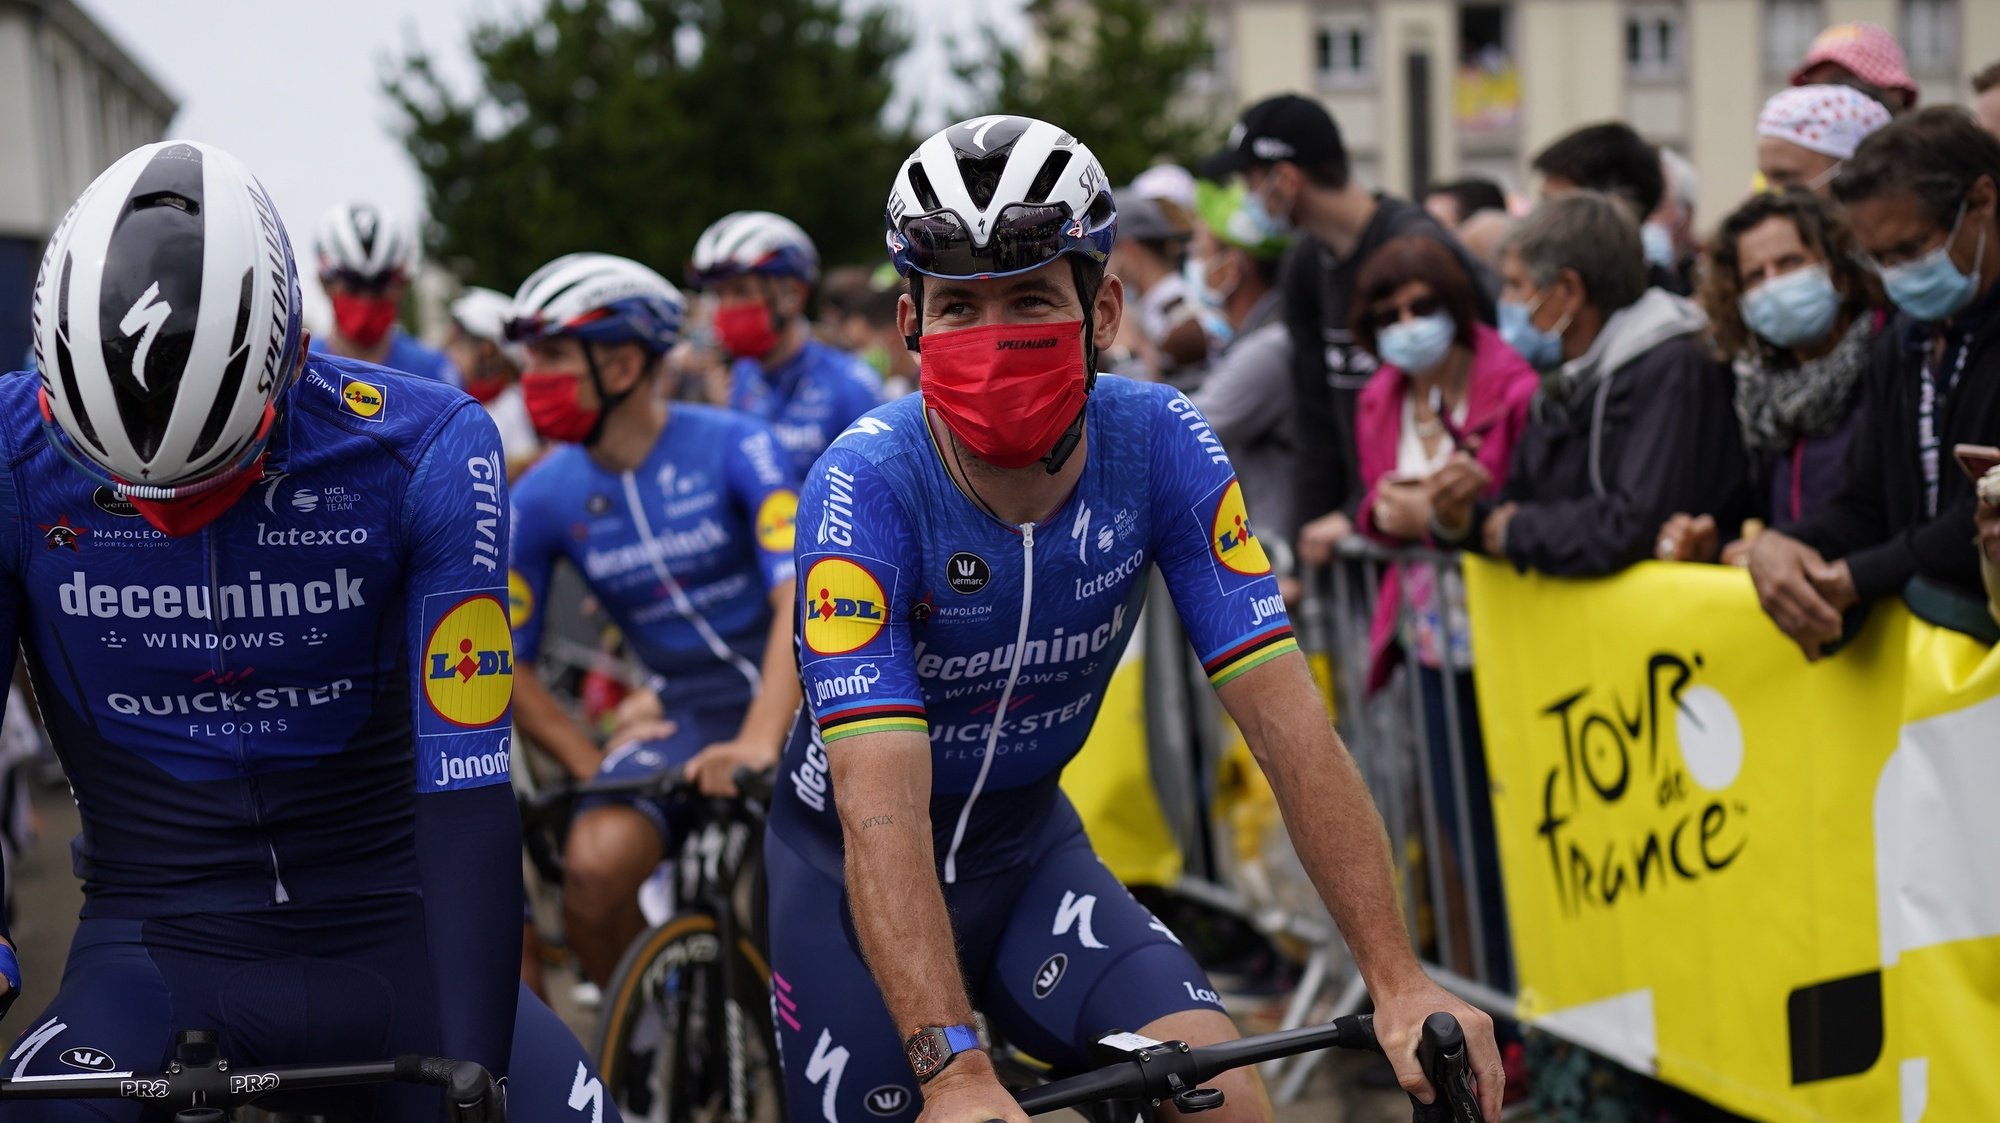 epa09302392 British rider Mark Cavendish of the Deceuninck Quick-Step team at the start of the 1st stage of the Tour de France 2021 over 197.8km from Brest to Landerneau, France, 26 June 2021.  EPA/DANIEL COLE / POOL